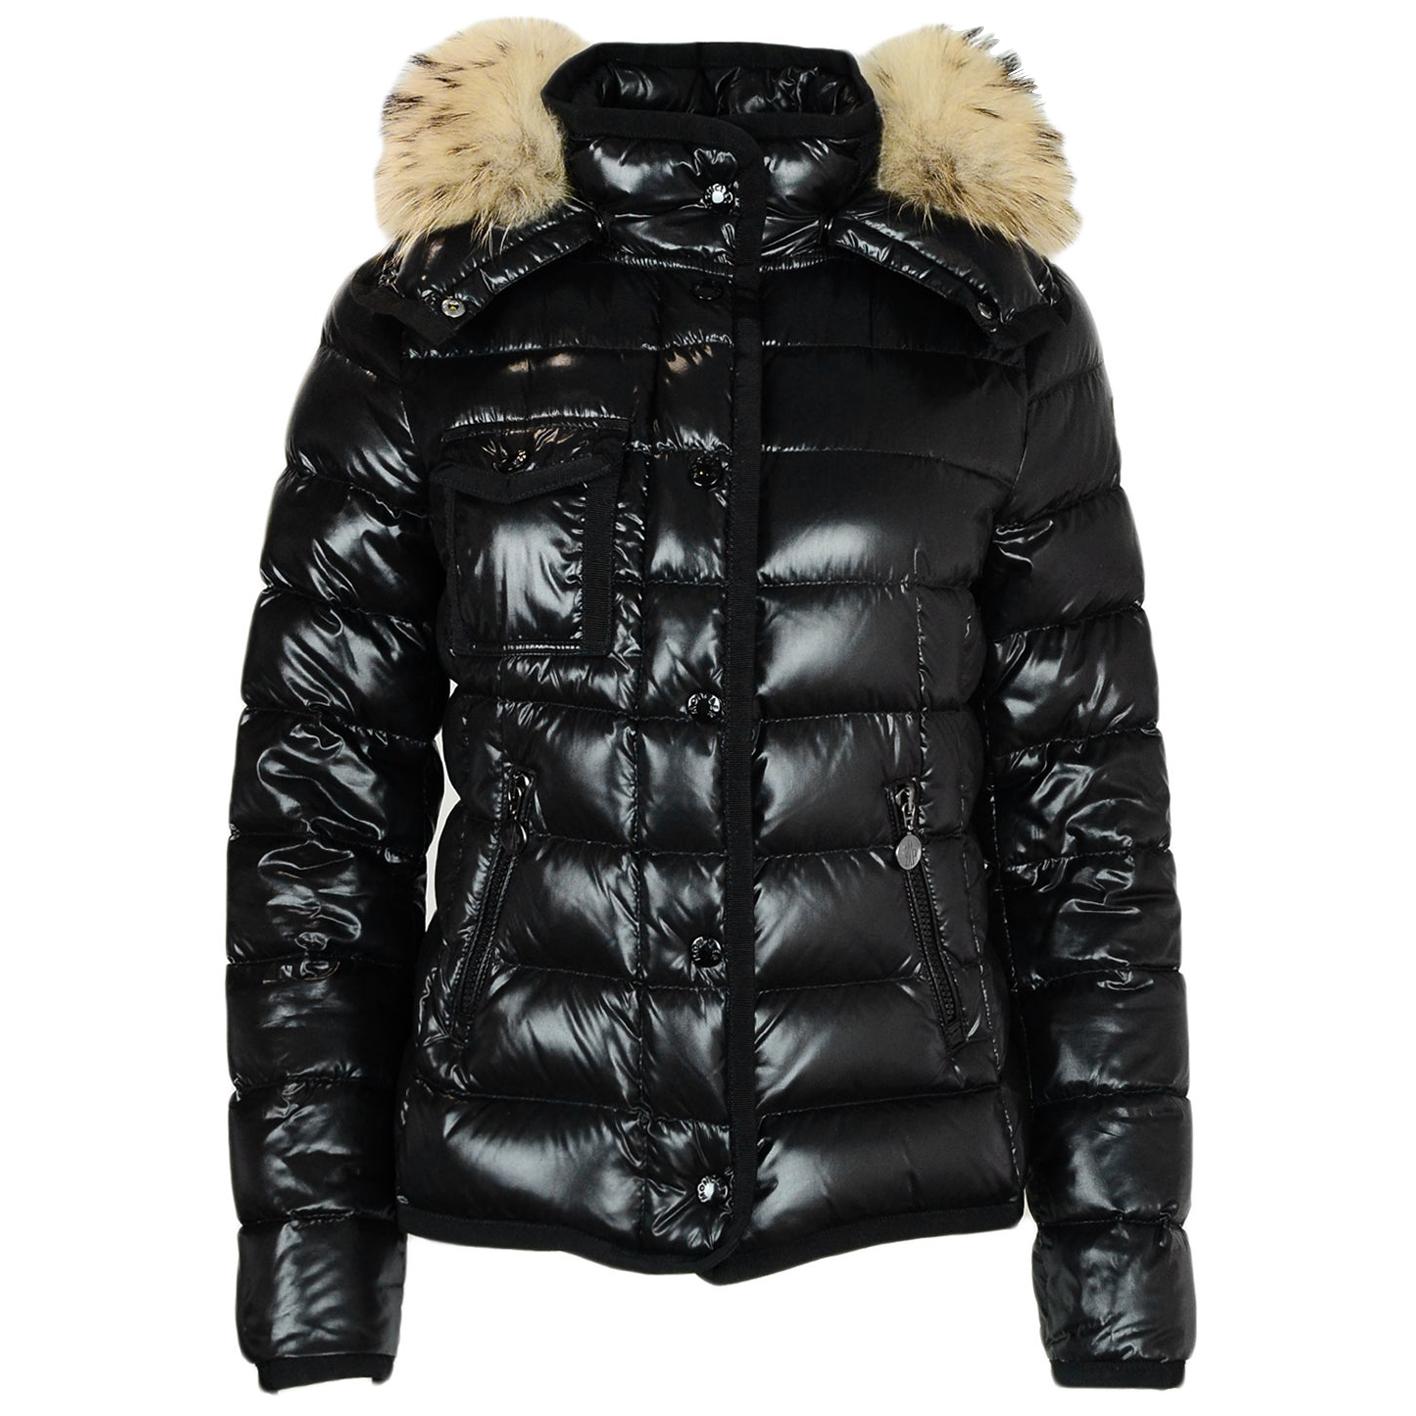 Moncler Black Quilted Armoise Down Jacket w/ Racoon Fur Hood sz 1